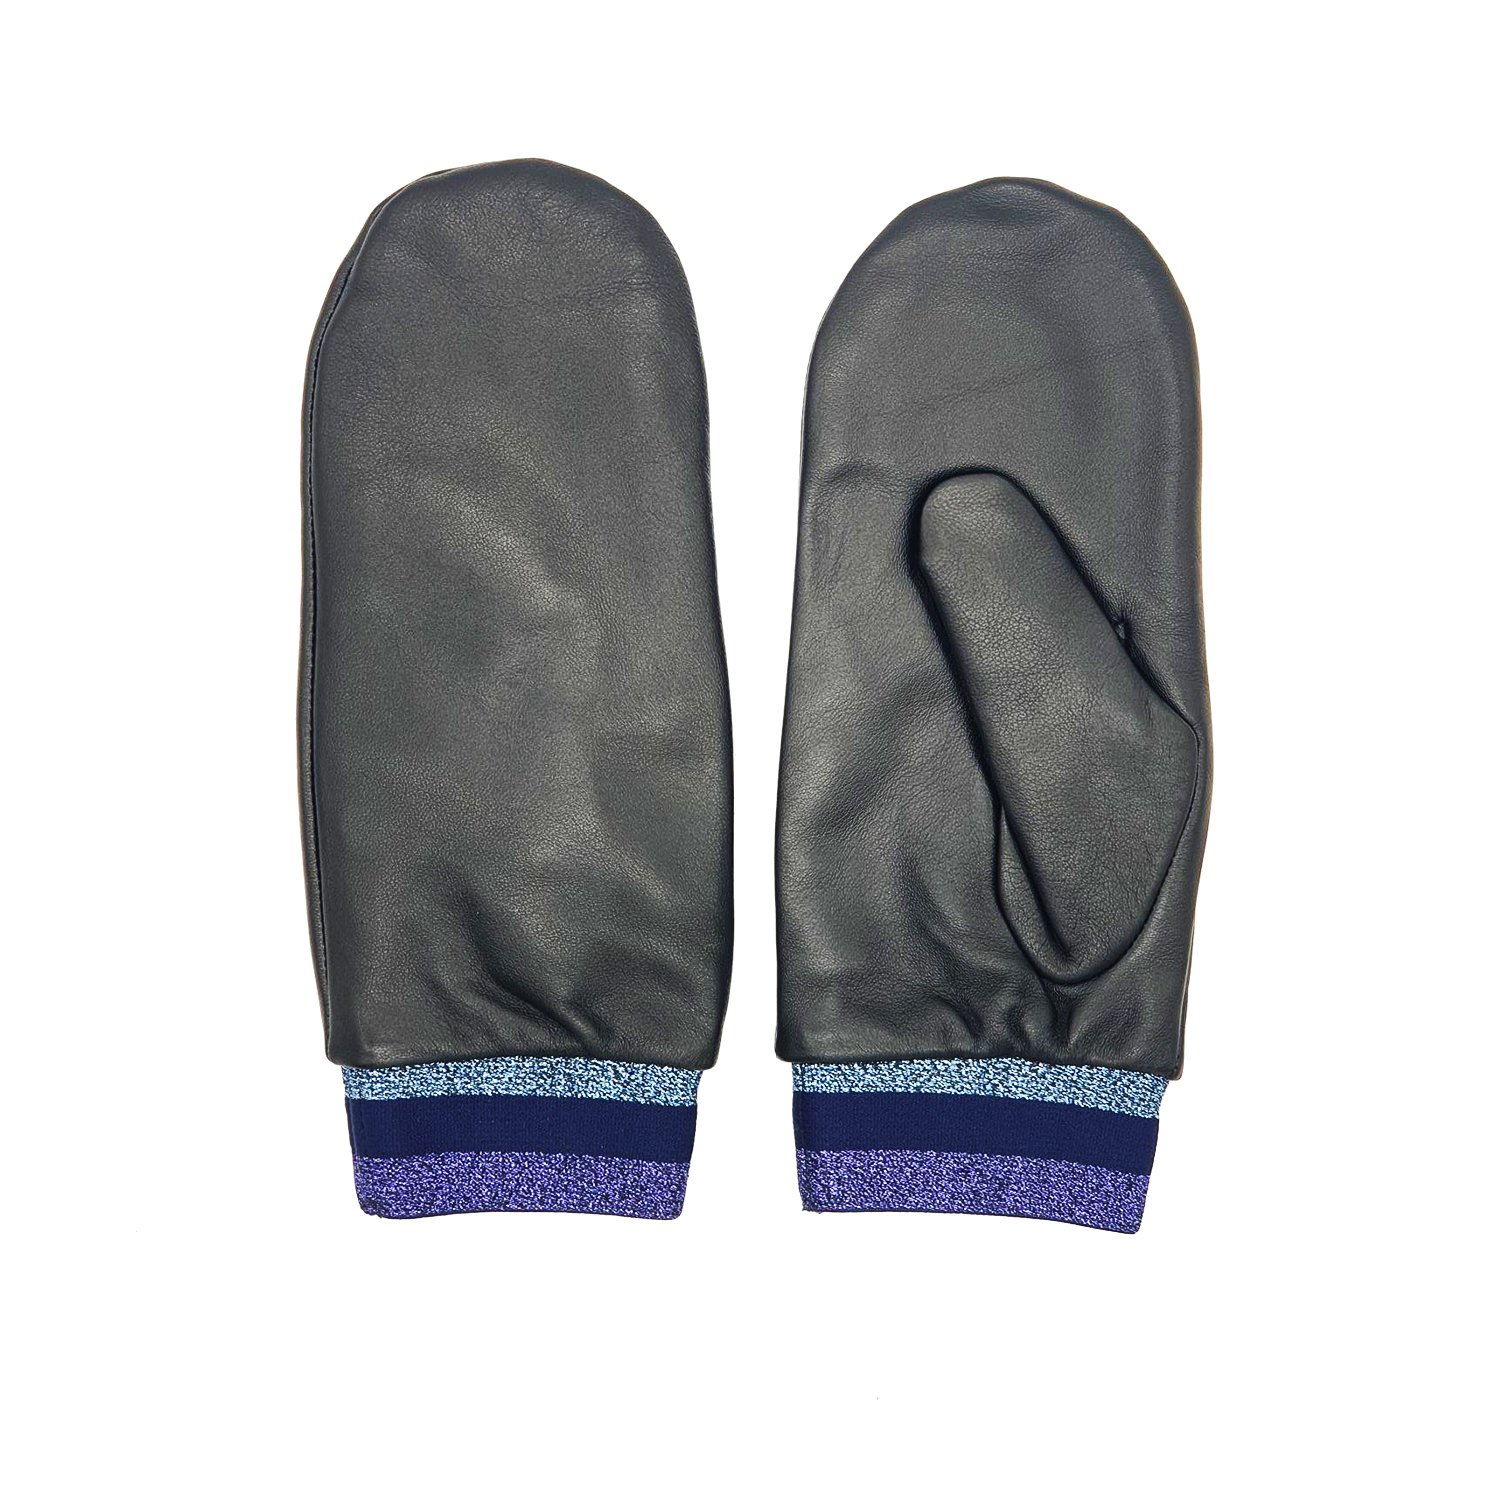 Nooki Design Lupin Leather Mittens